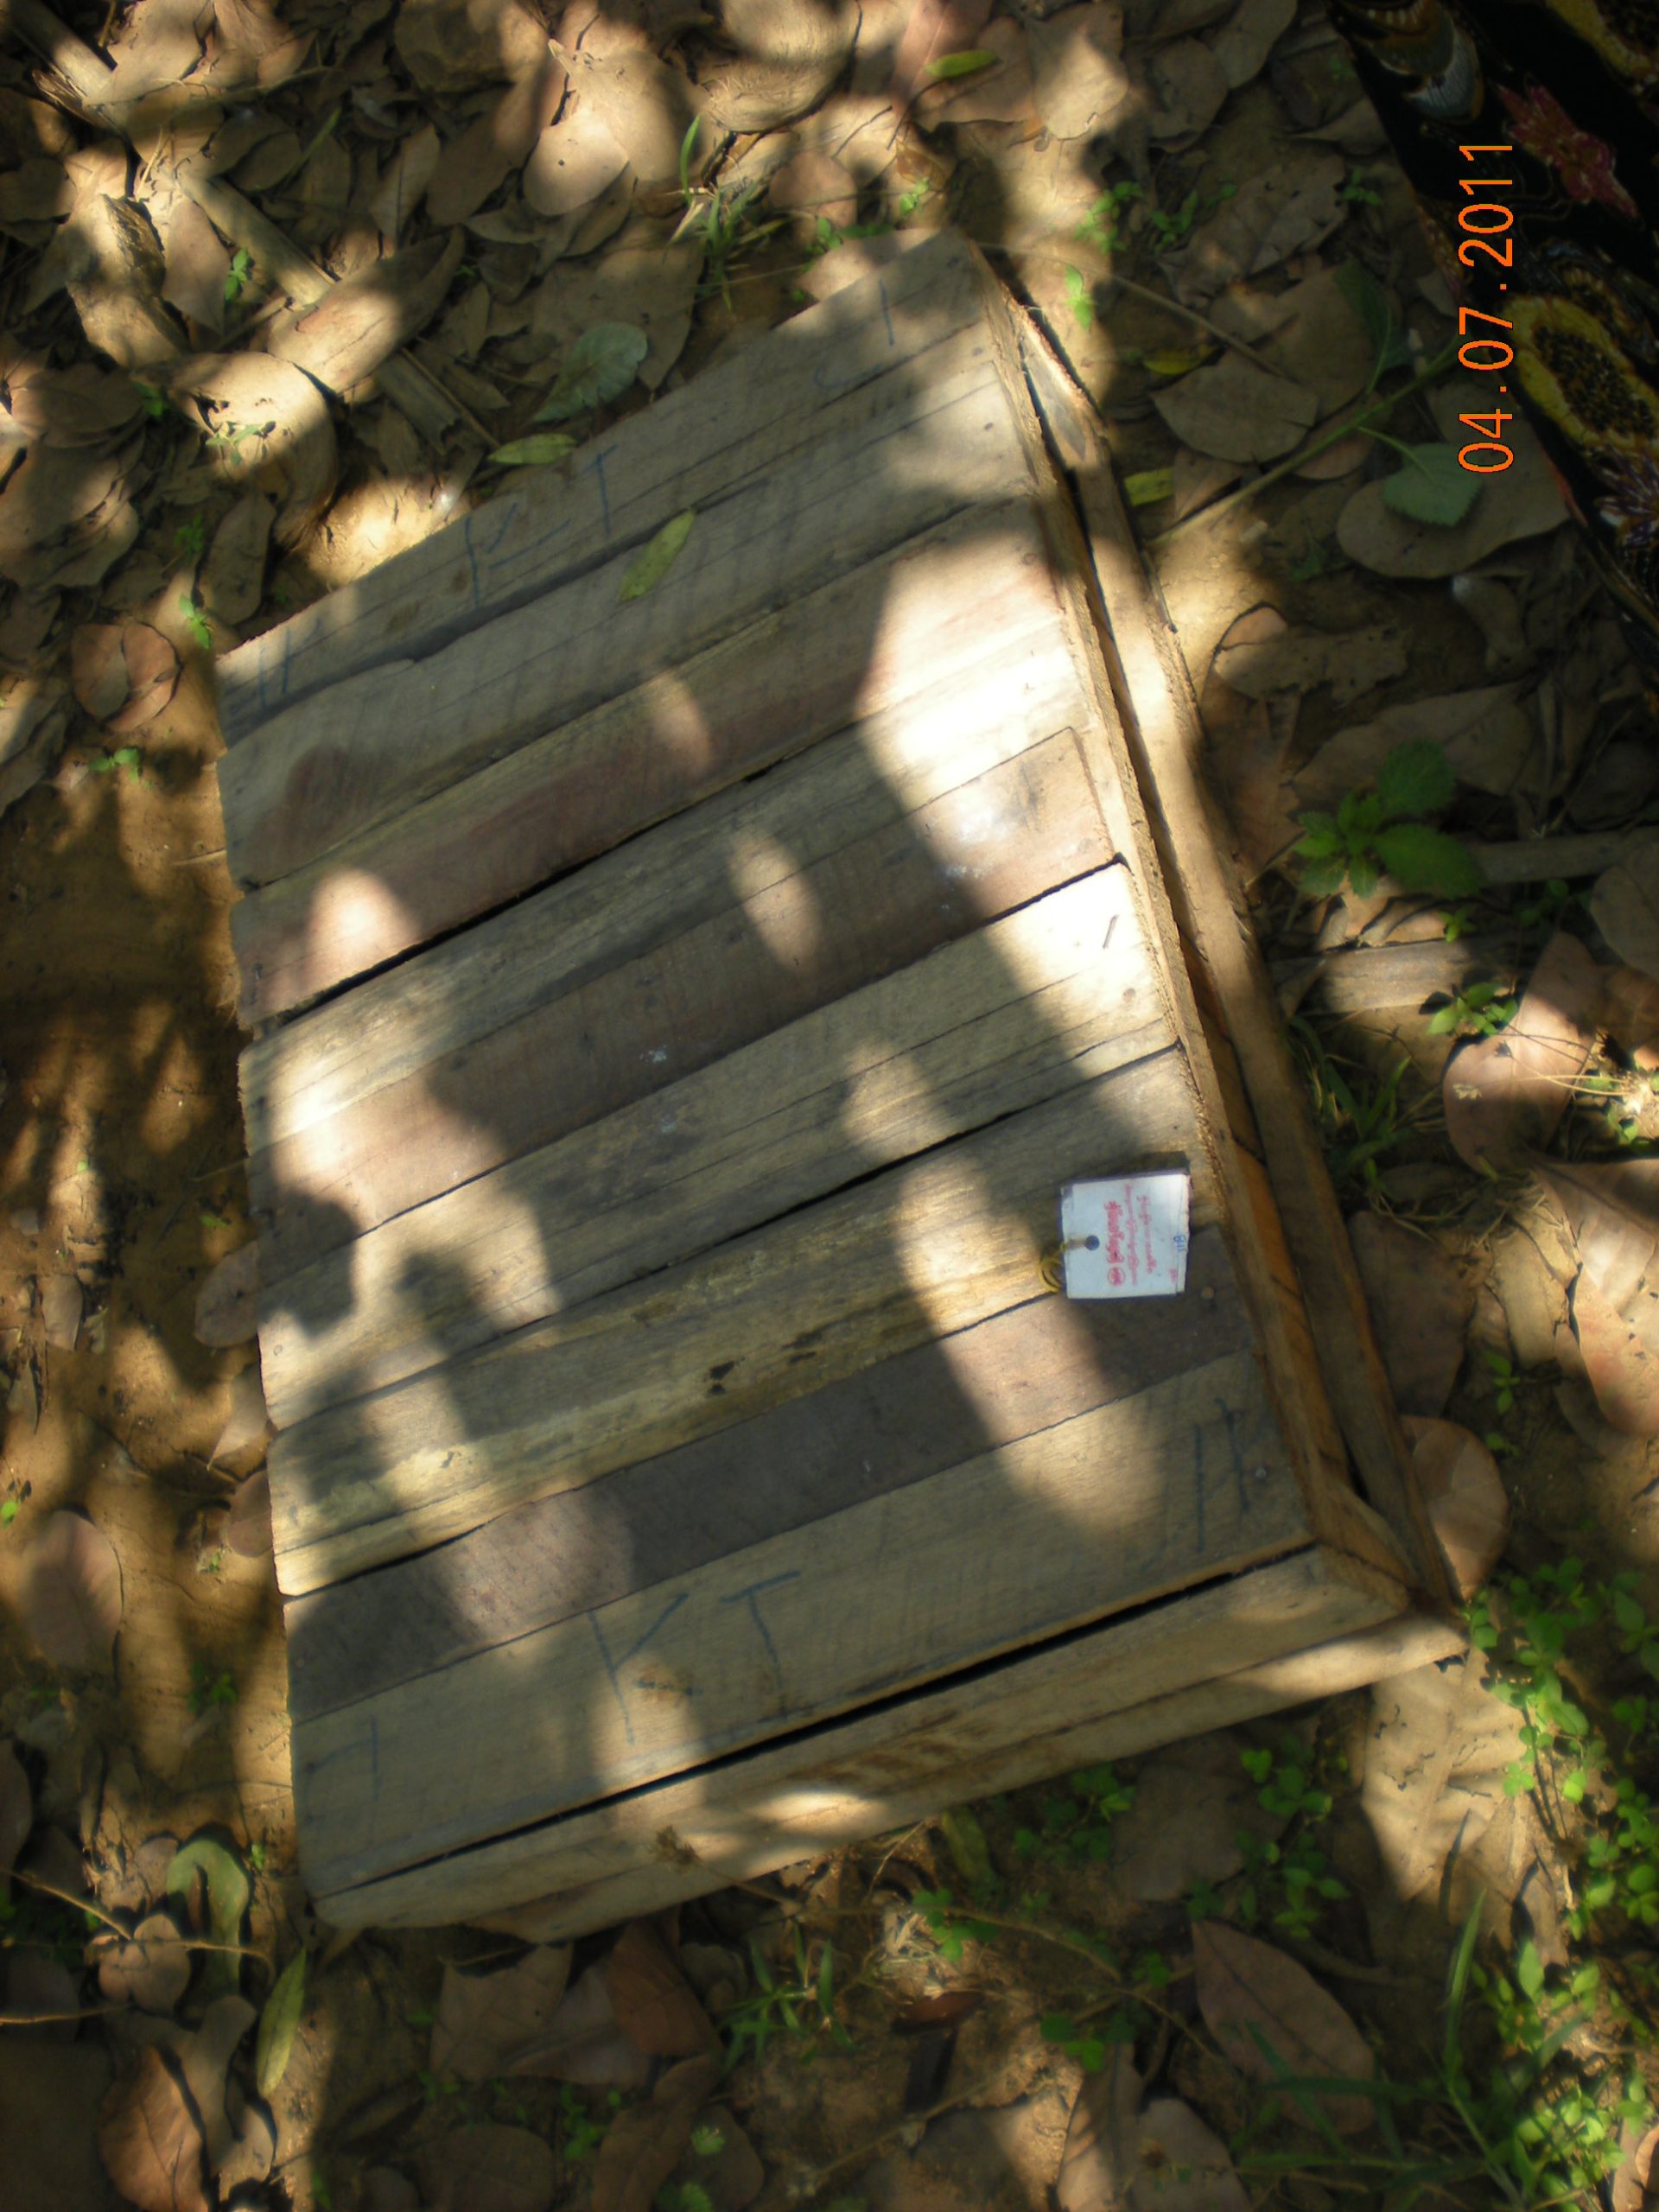 This_wooden_box_was_used_to_transport_the_turtles_to_their_new_facility_safely